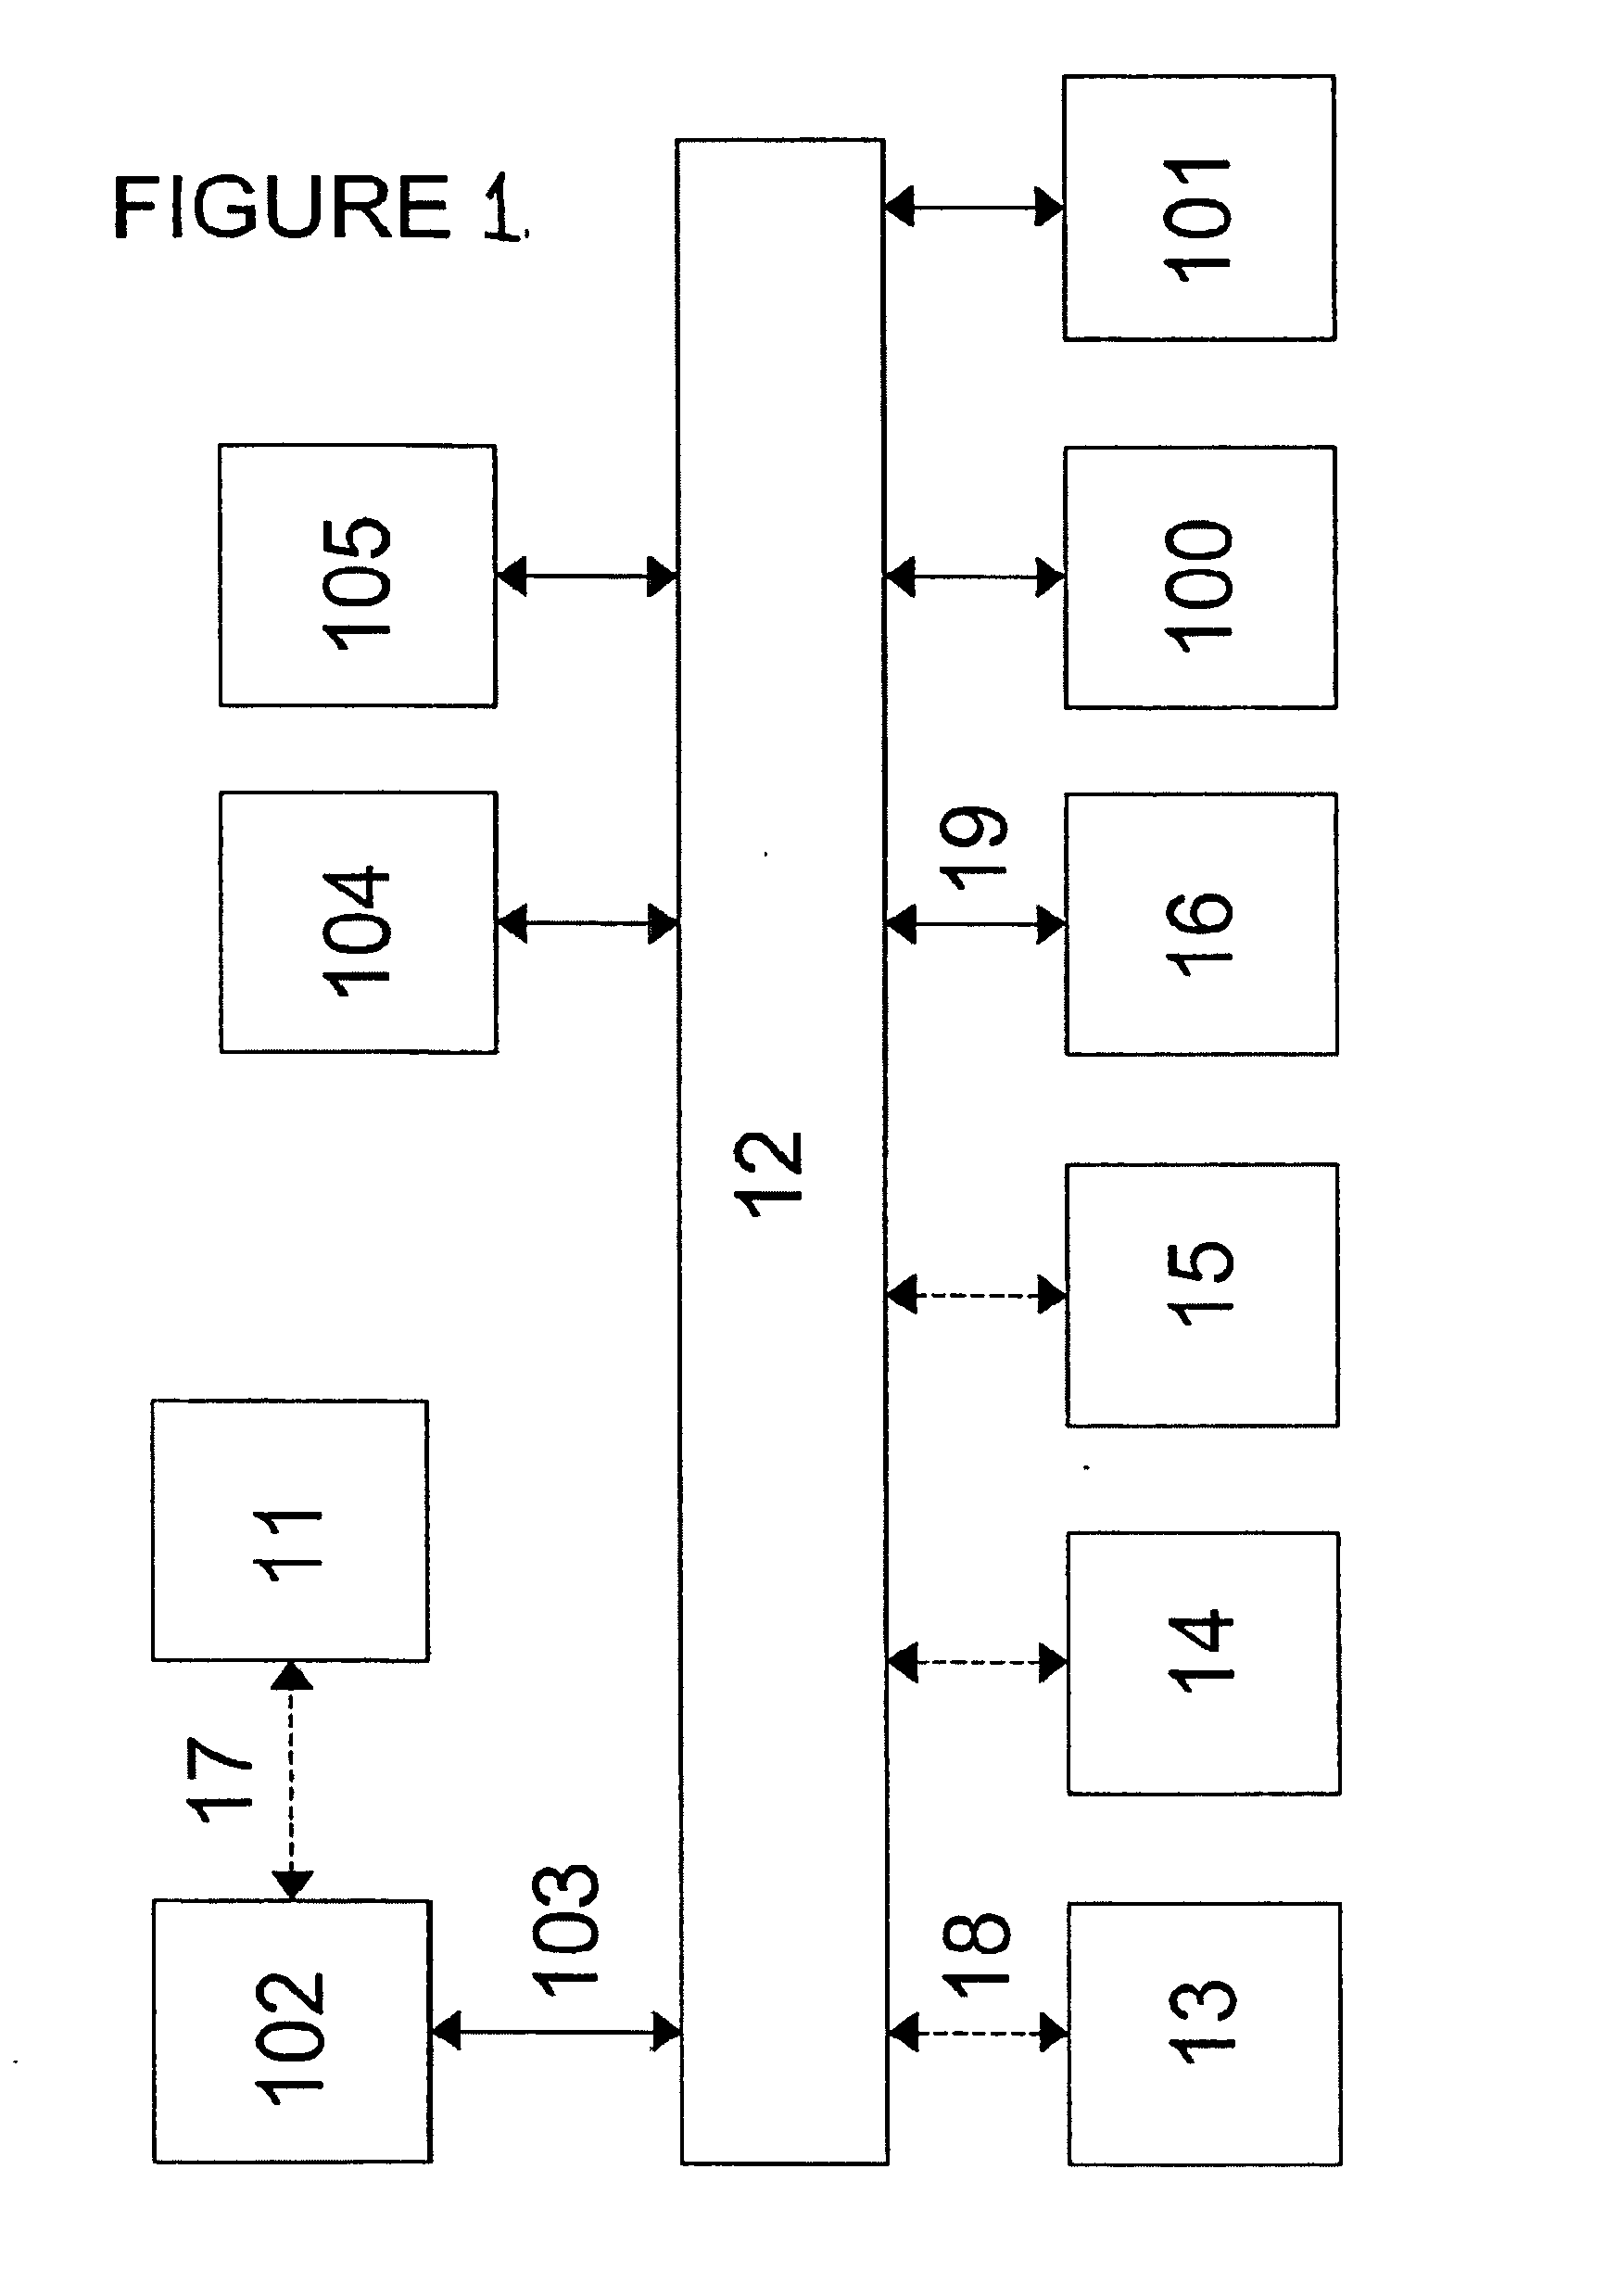 Portable navigation device with wireless interface